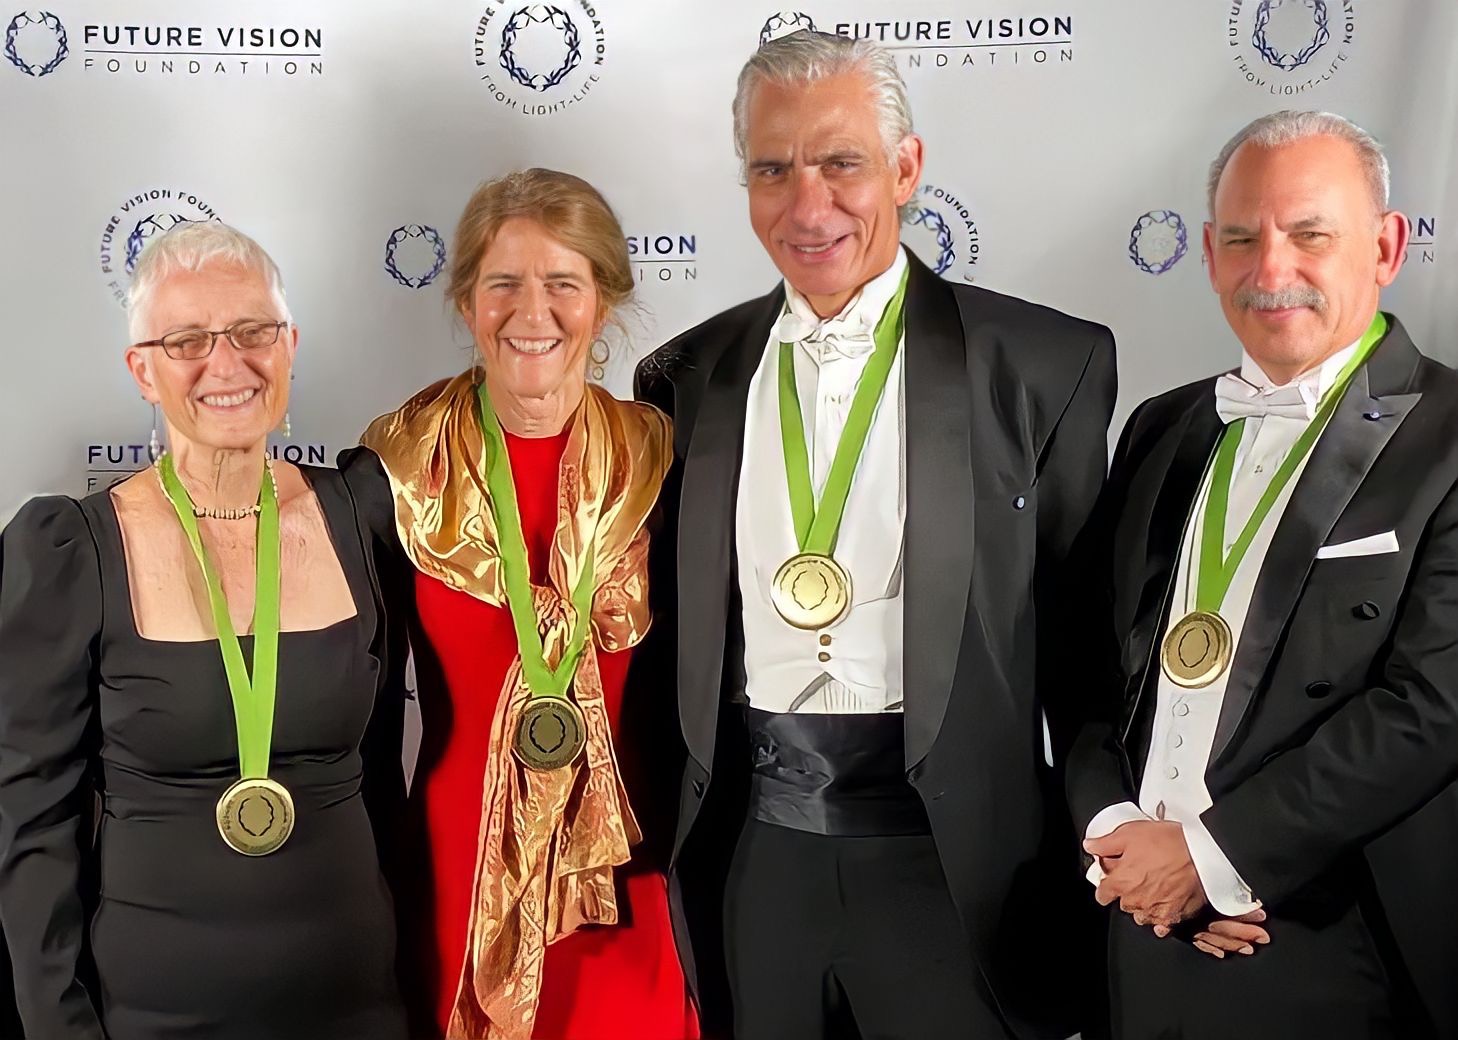 Drs. Christine Curcio, Jean Bennett, Albert Maguire, and Baruch Kuppermann at the 2022 Future Vision Awards